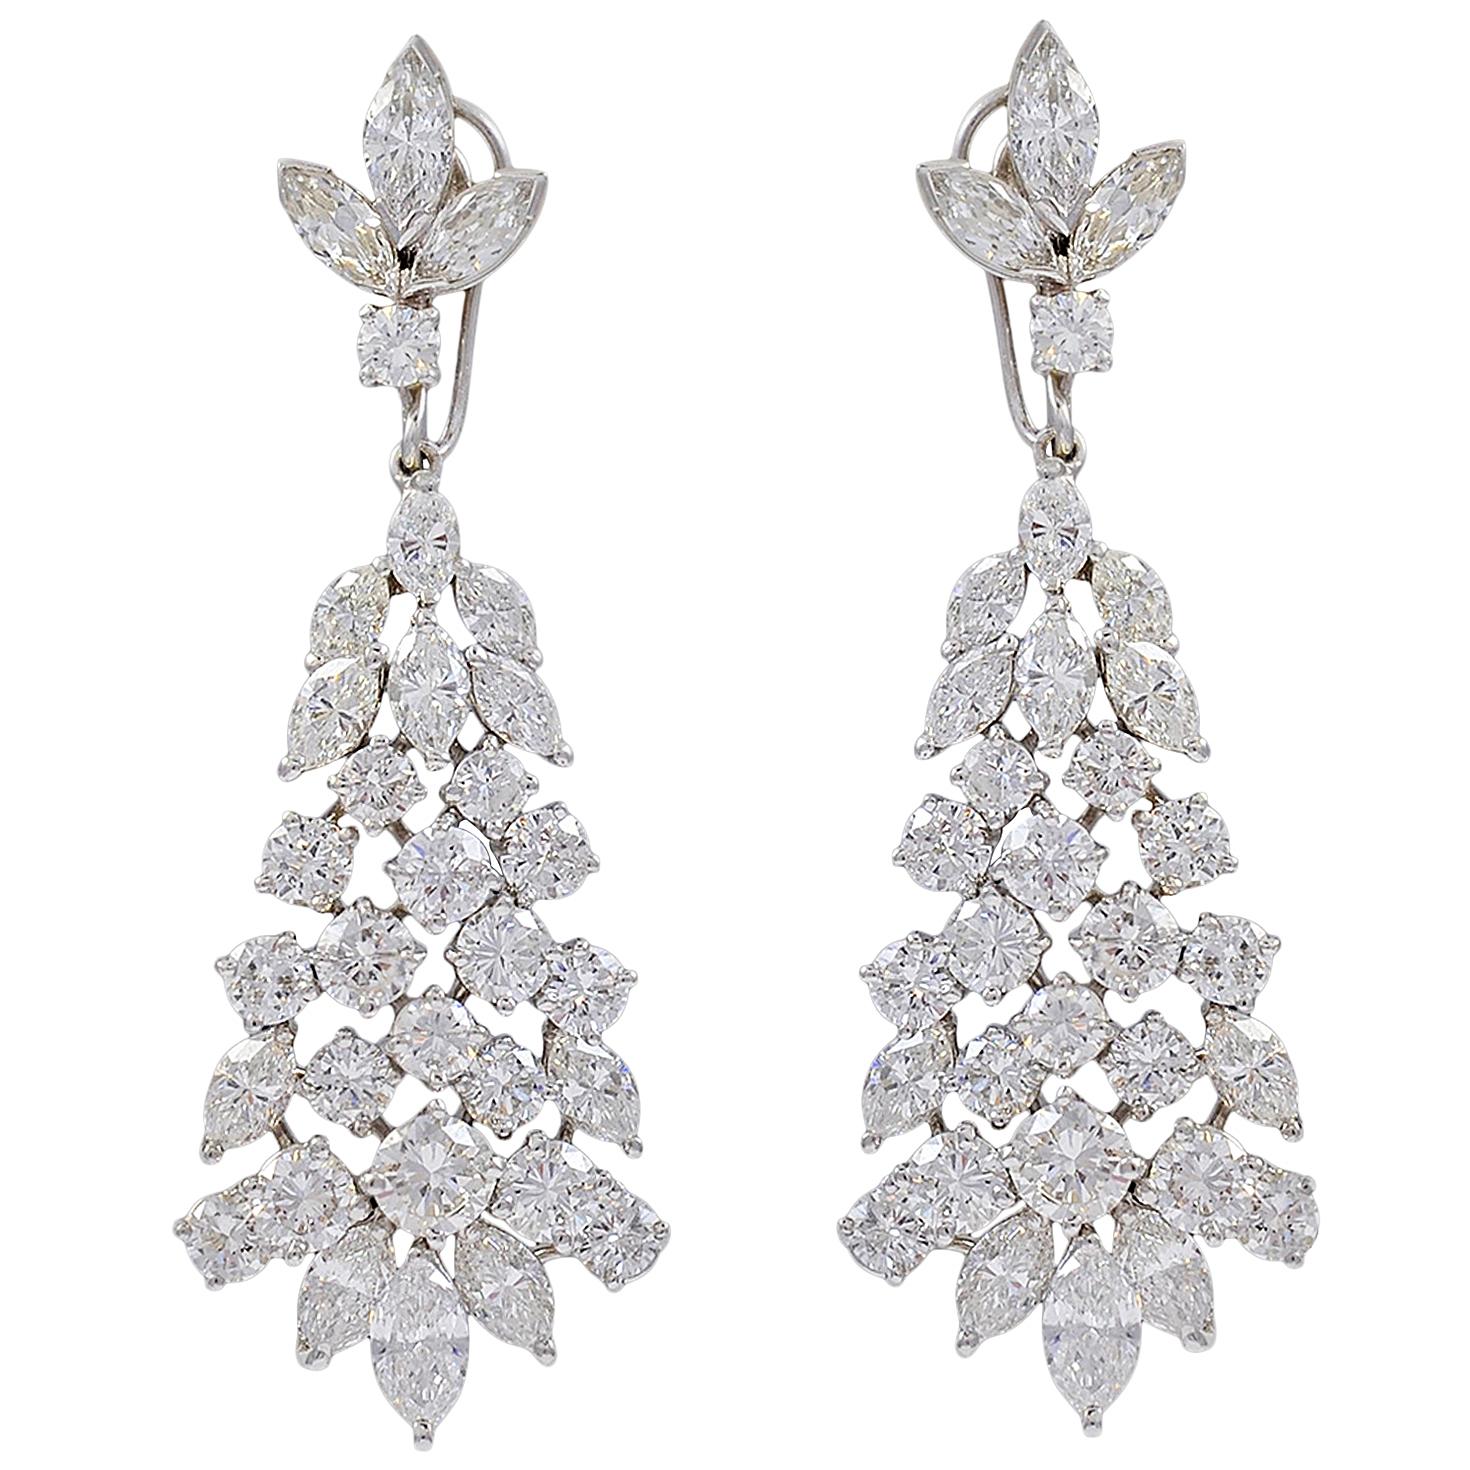 1950s 12 Ct Day and Night Detachable Diamond Drop Cocktail Earrings in Platinum